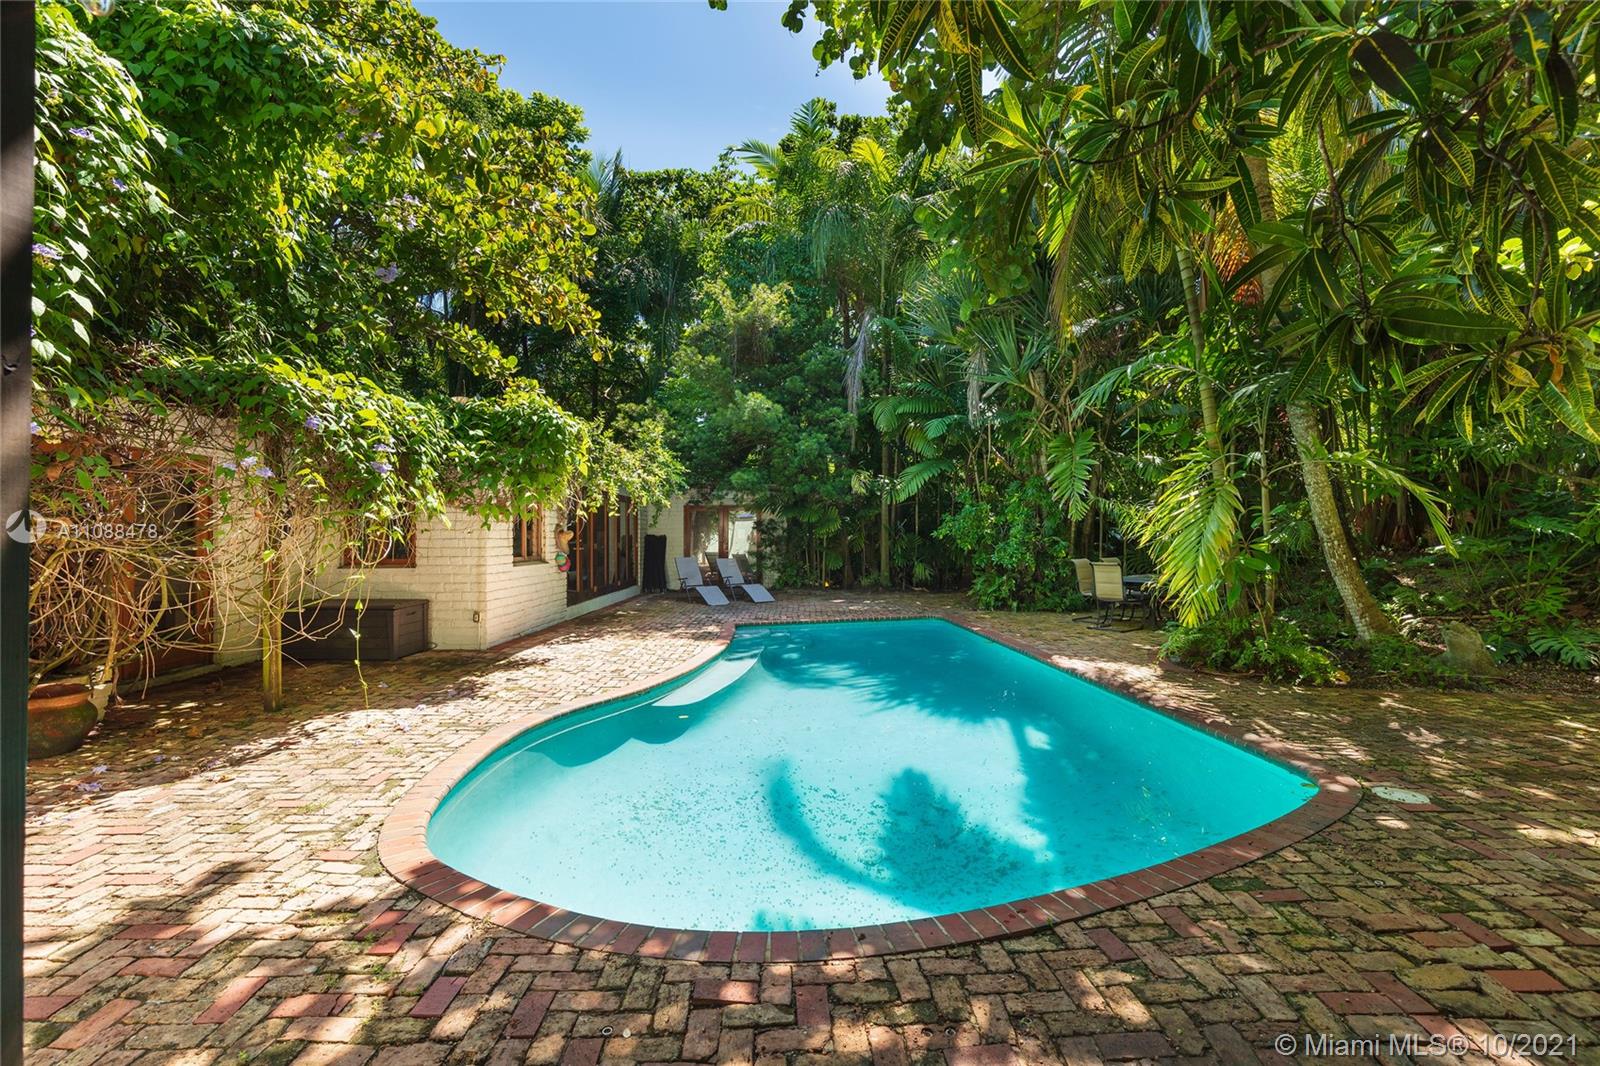 a view of a swimming pool with an outdoor space